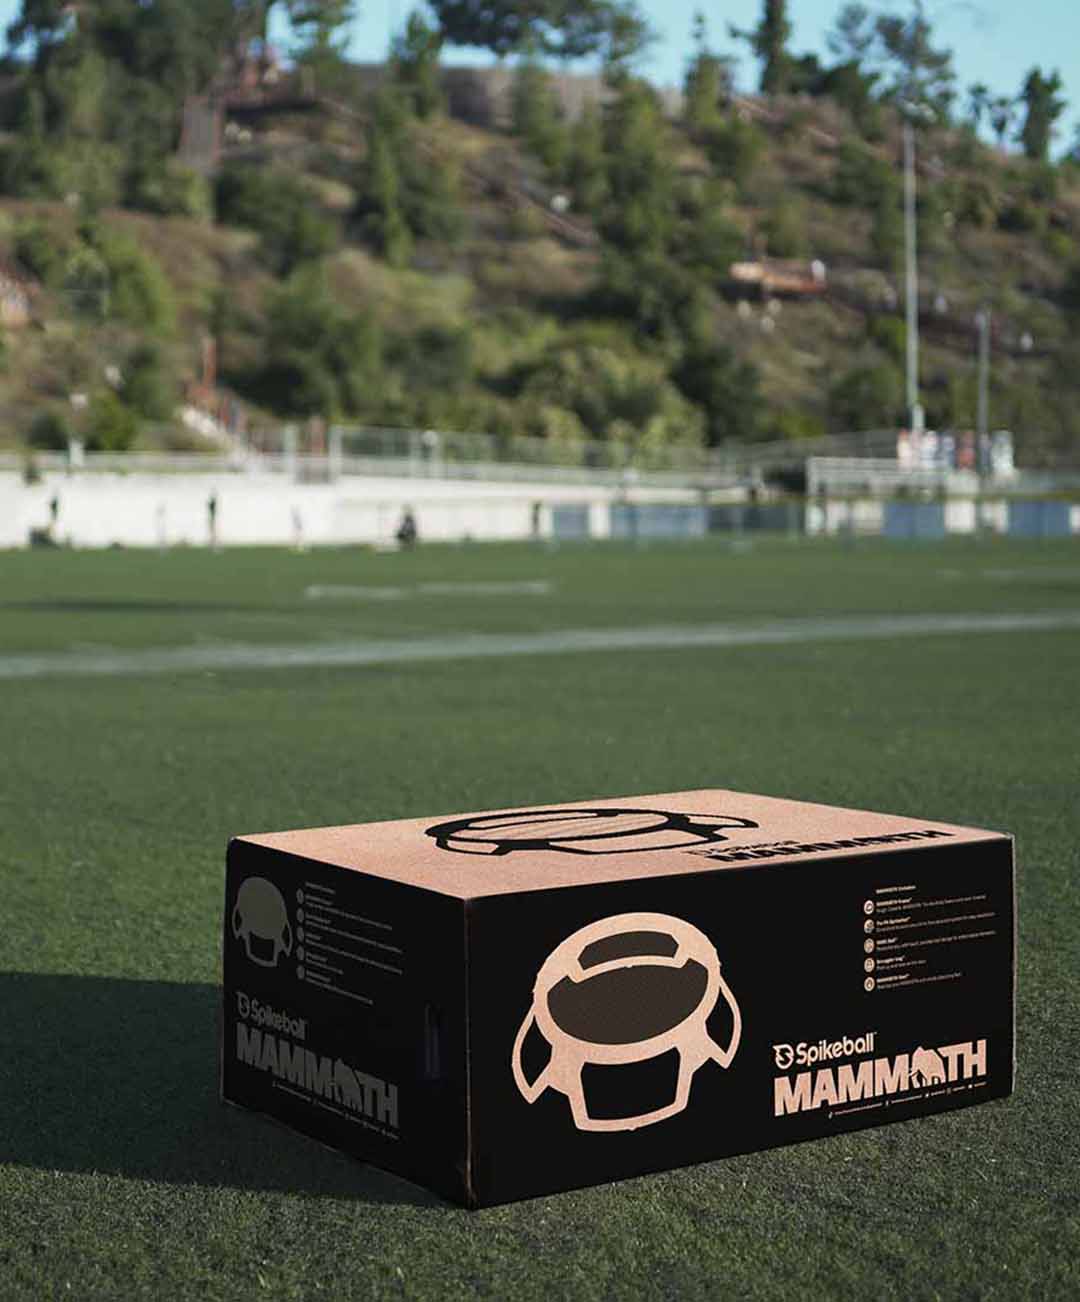 A Spikeball Mammoth box placed on a grassy field. The box features the Spikeball Mammoth logo and illustrations of the product. Trees and a sports field are visible in the background.